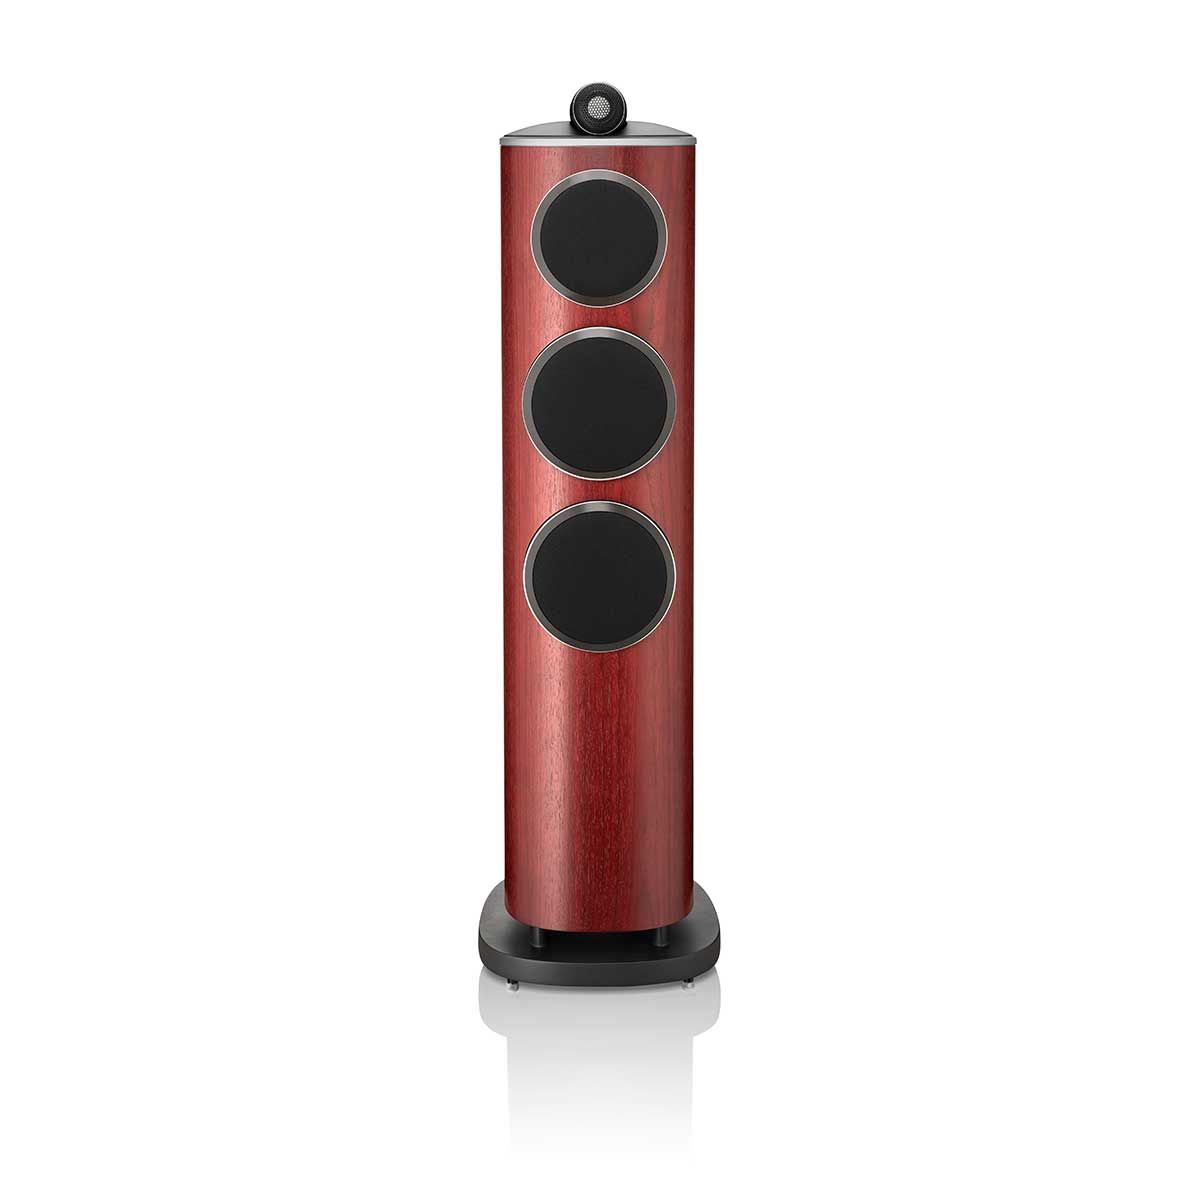 Bowers & Wilkins 804 D4 Floorstanding Speaker, Satin Rosenut, front view with grille